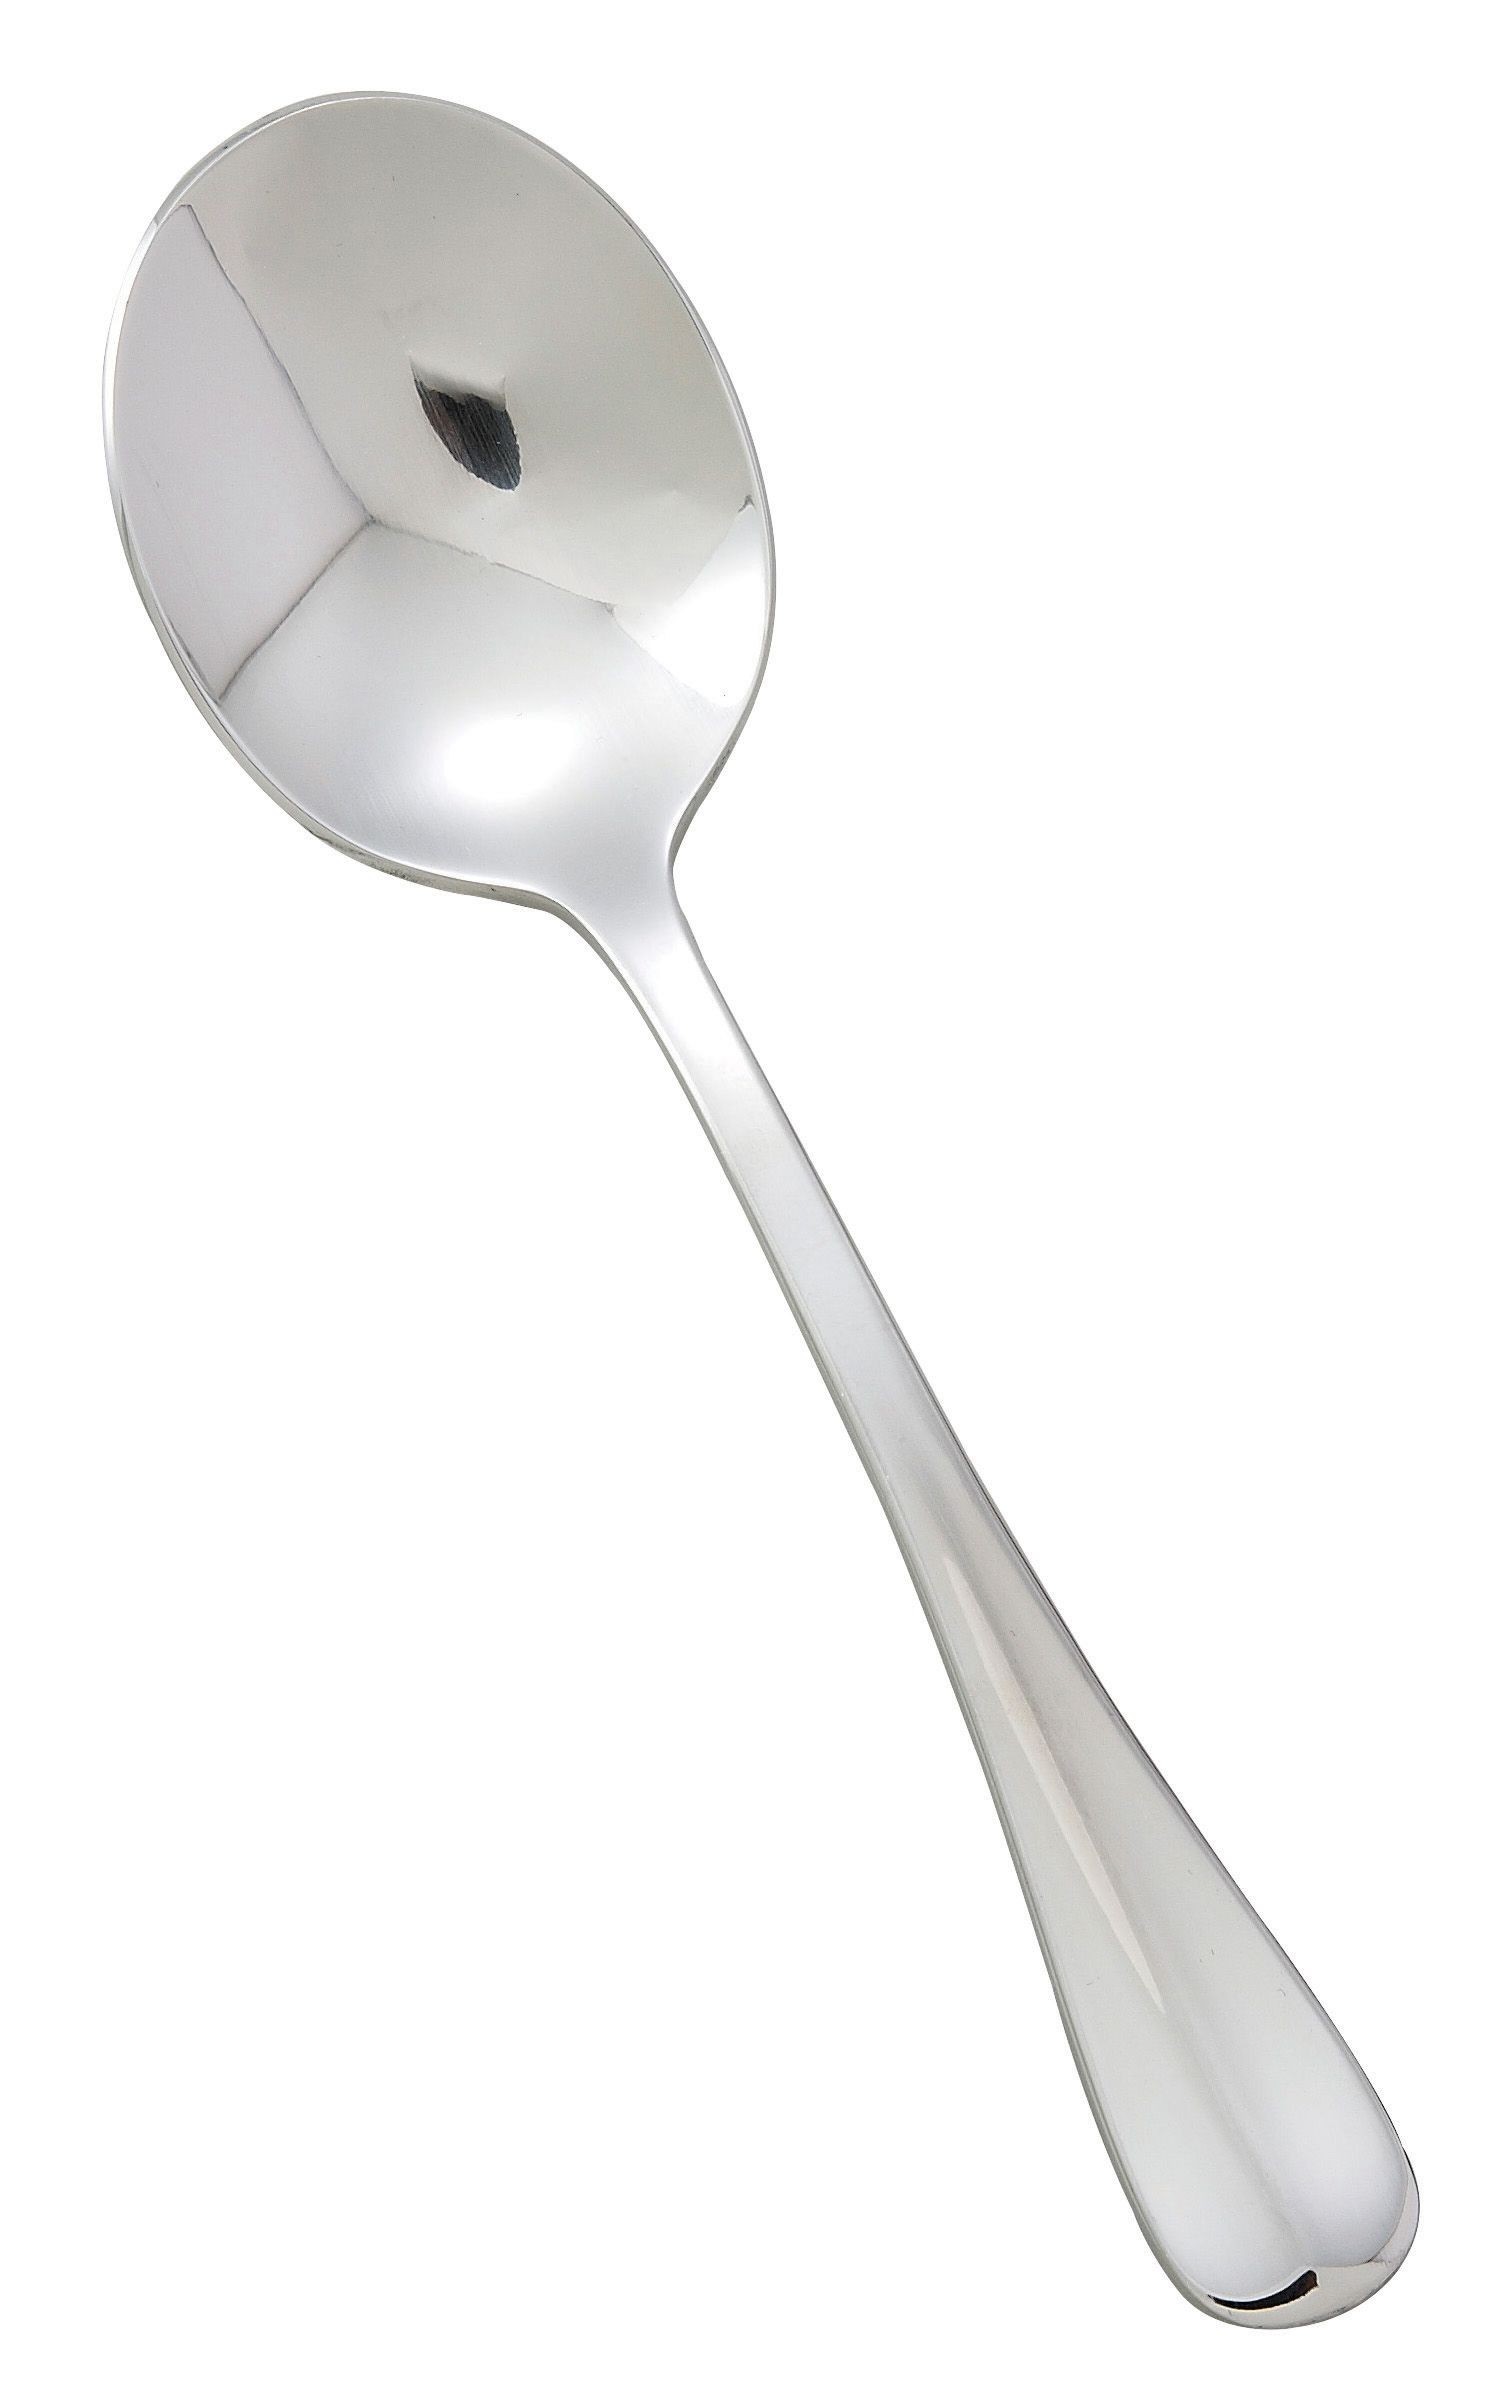 Winco 0034-04 Stanford Extra Heavy Stainless Steel Bouillon Spoon (12/Pack)